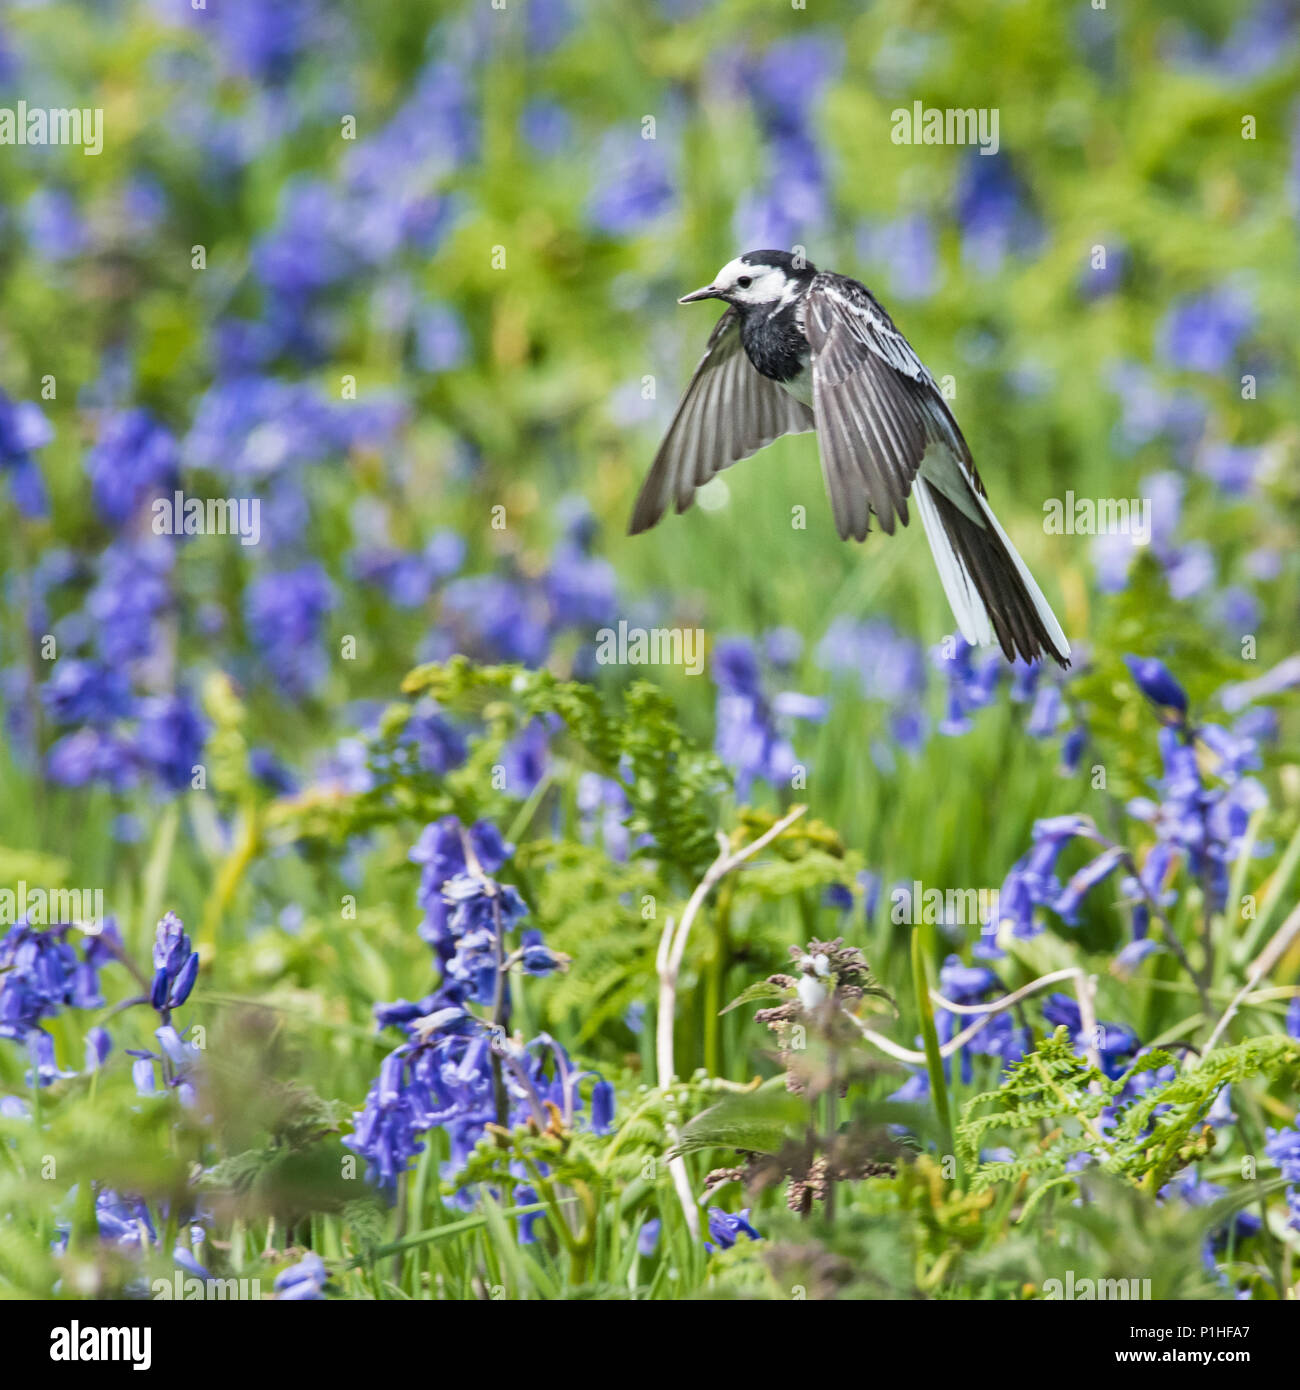 Pied Wagtail (Motacilla alba yarrellii), Feeding on Insects Above Wild Flowers Stock Photo